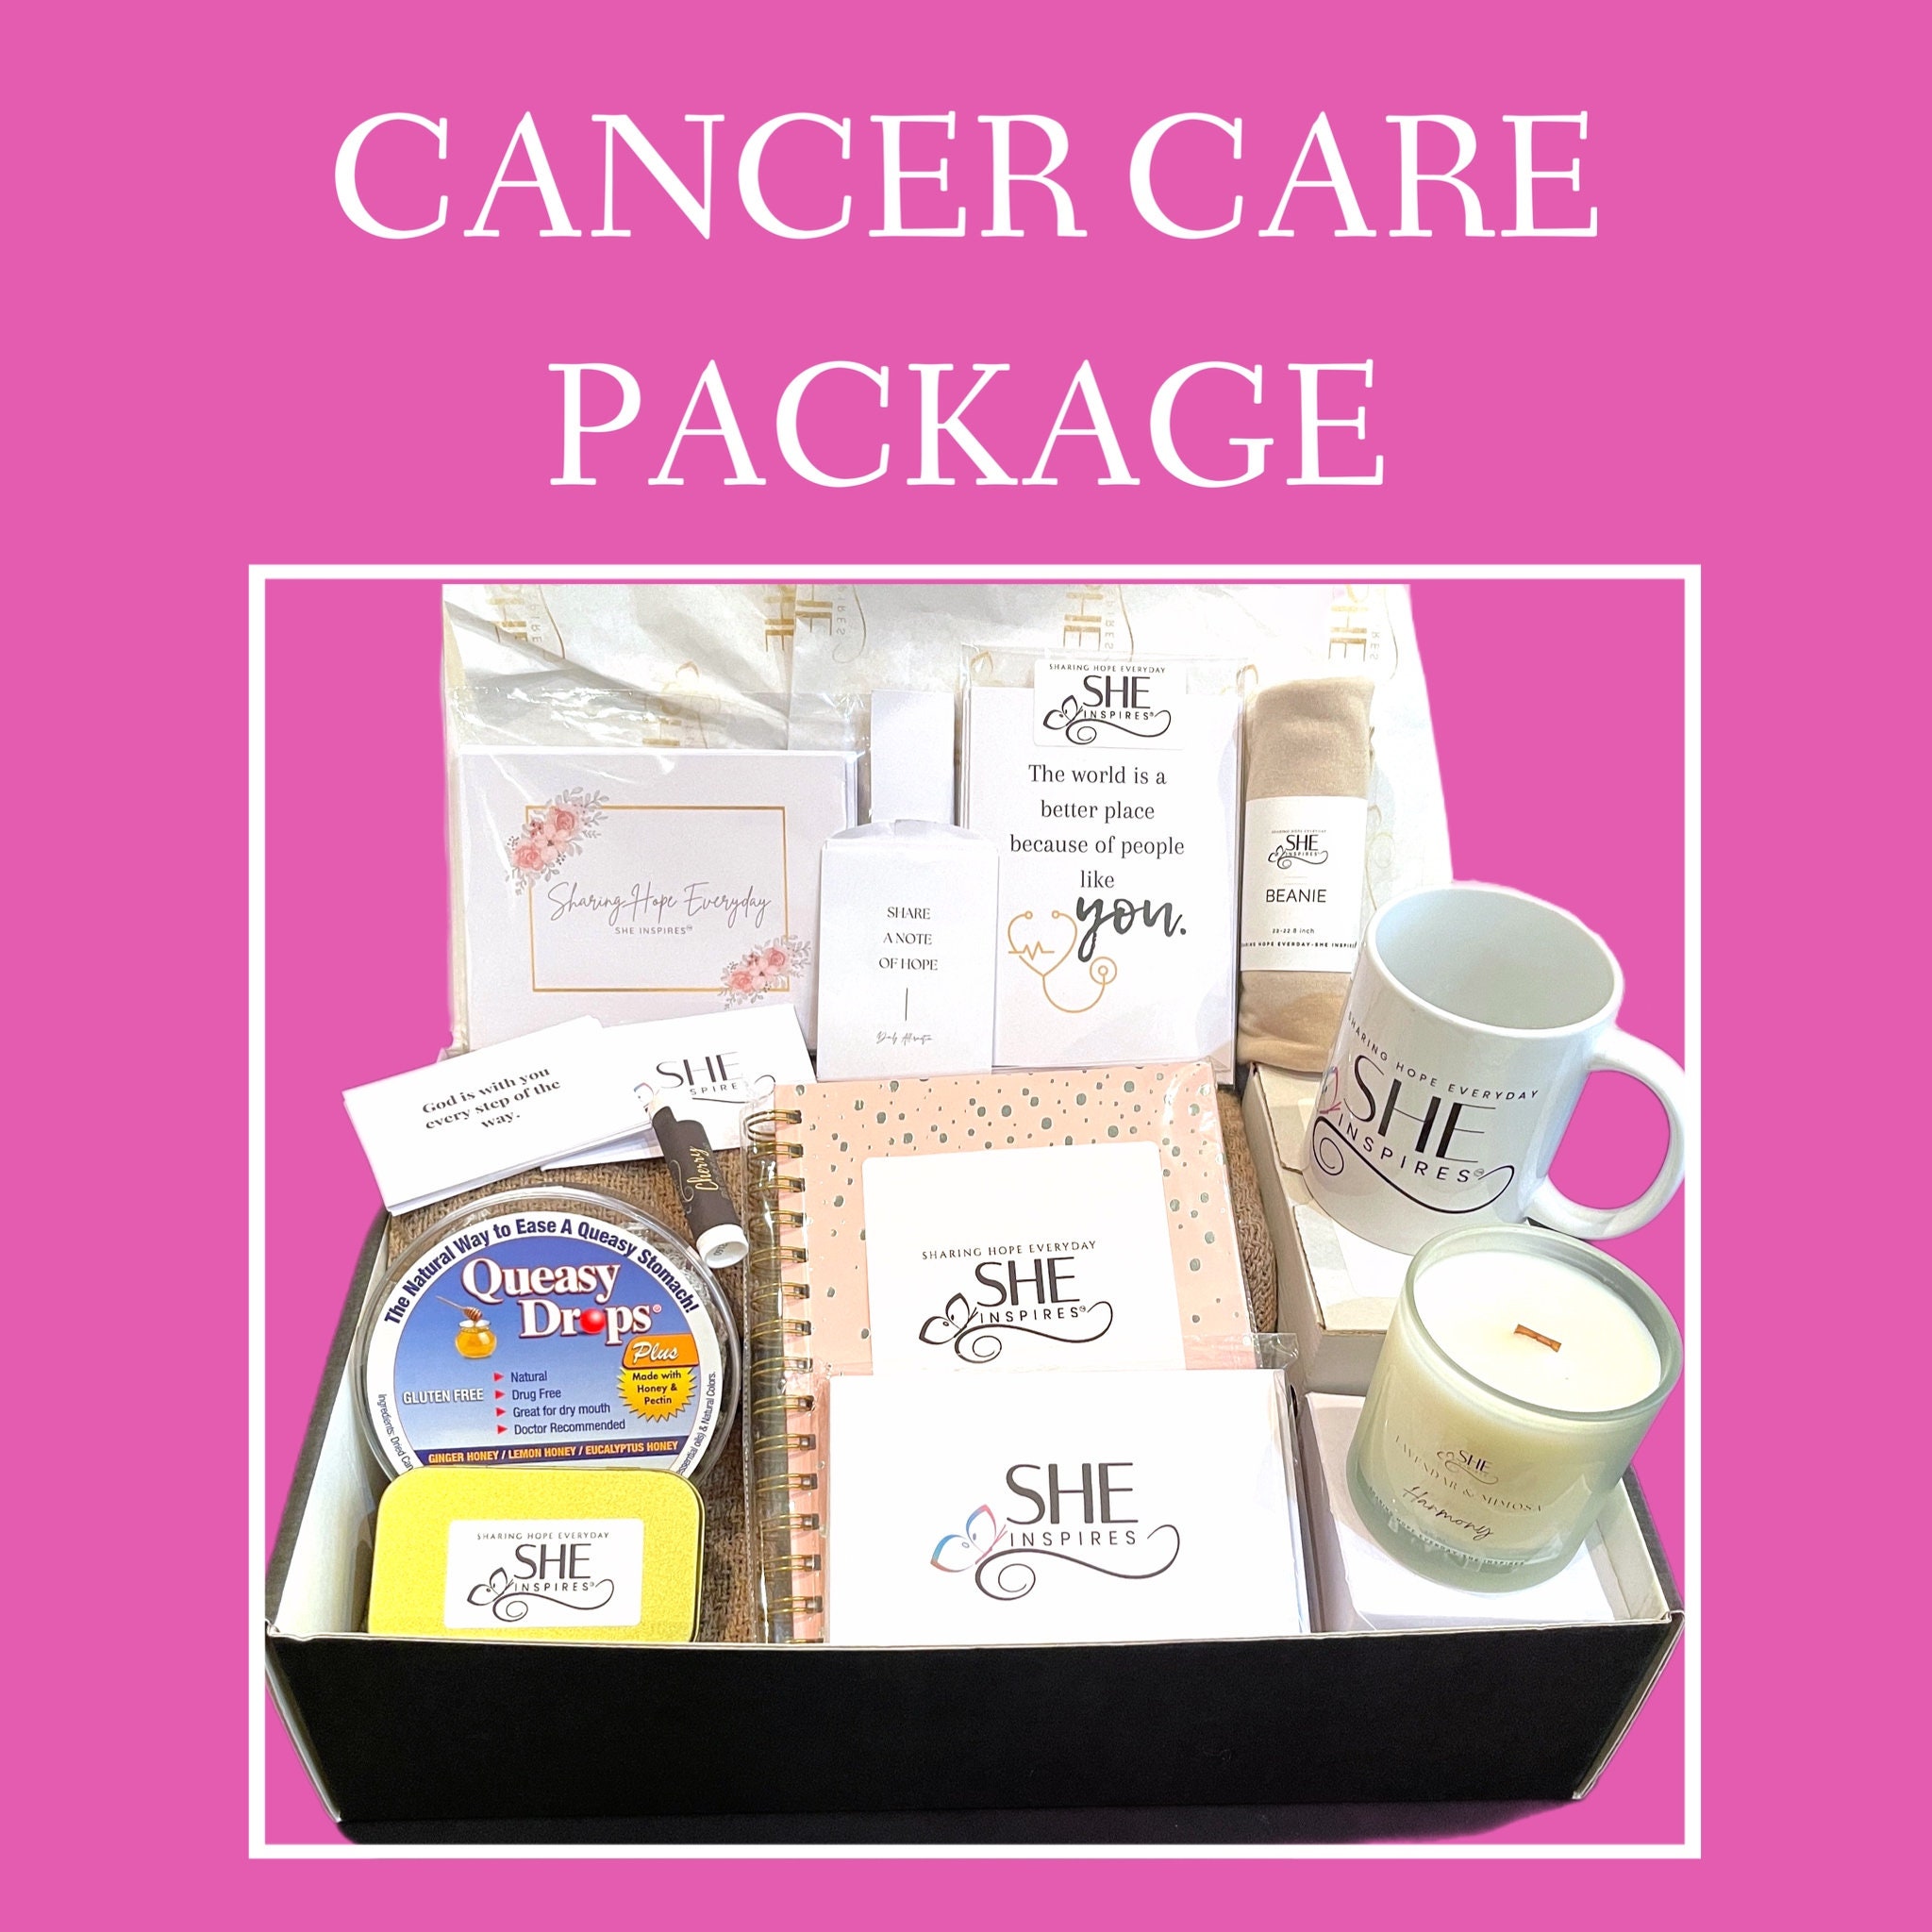 Chemotherapy Patient Comfort Kit - H33 - IdeaStage Promotional Products